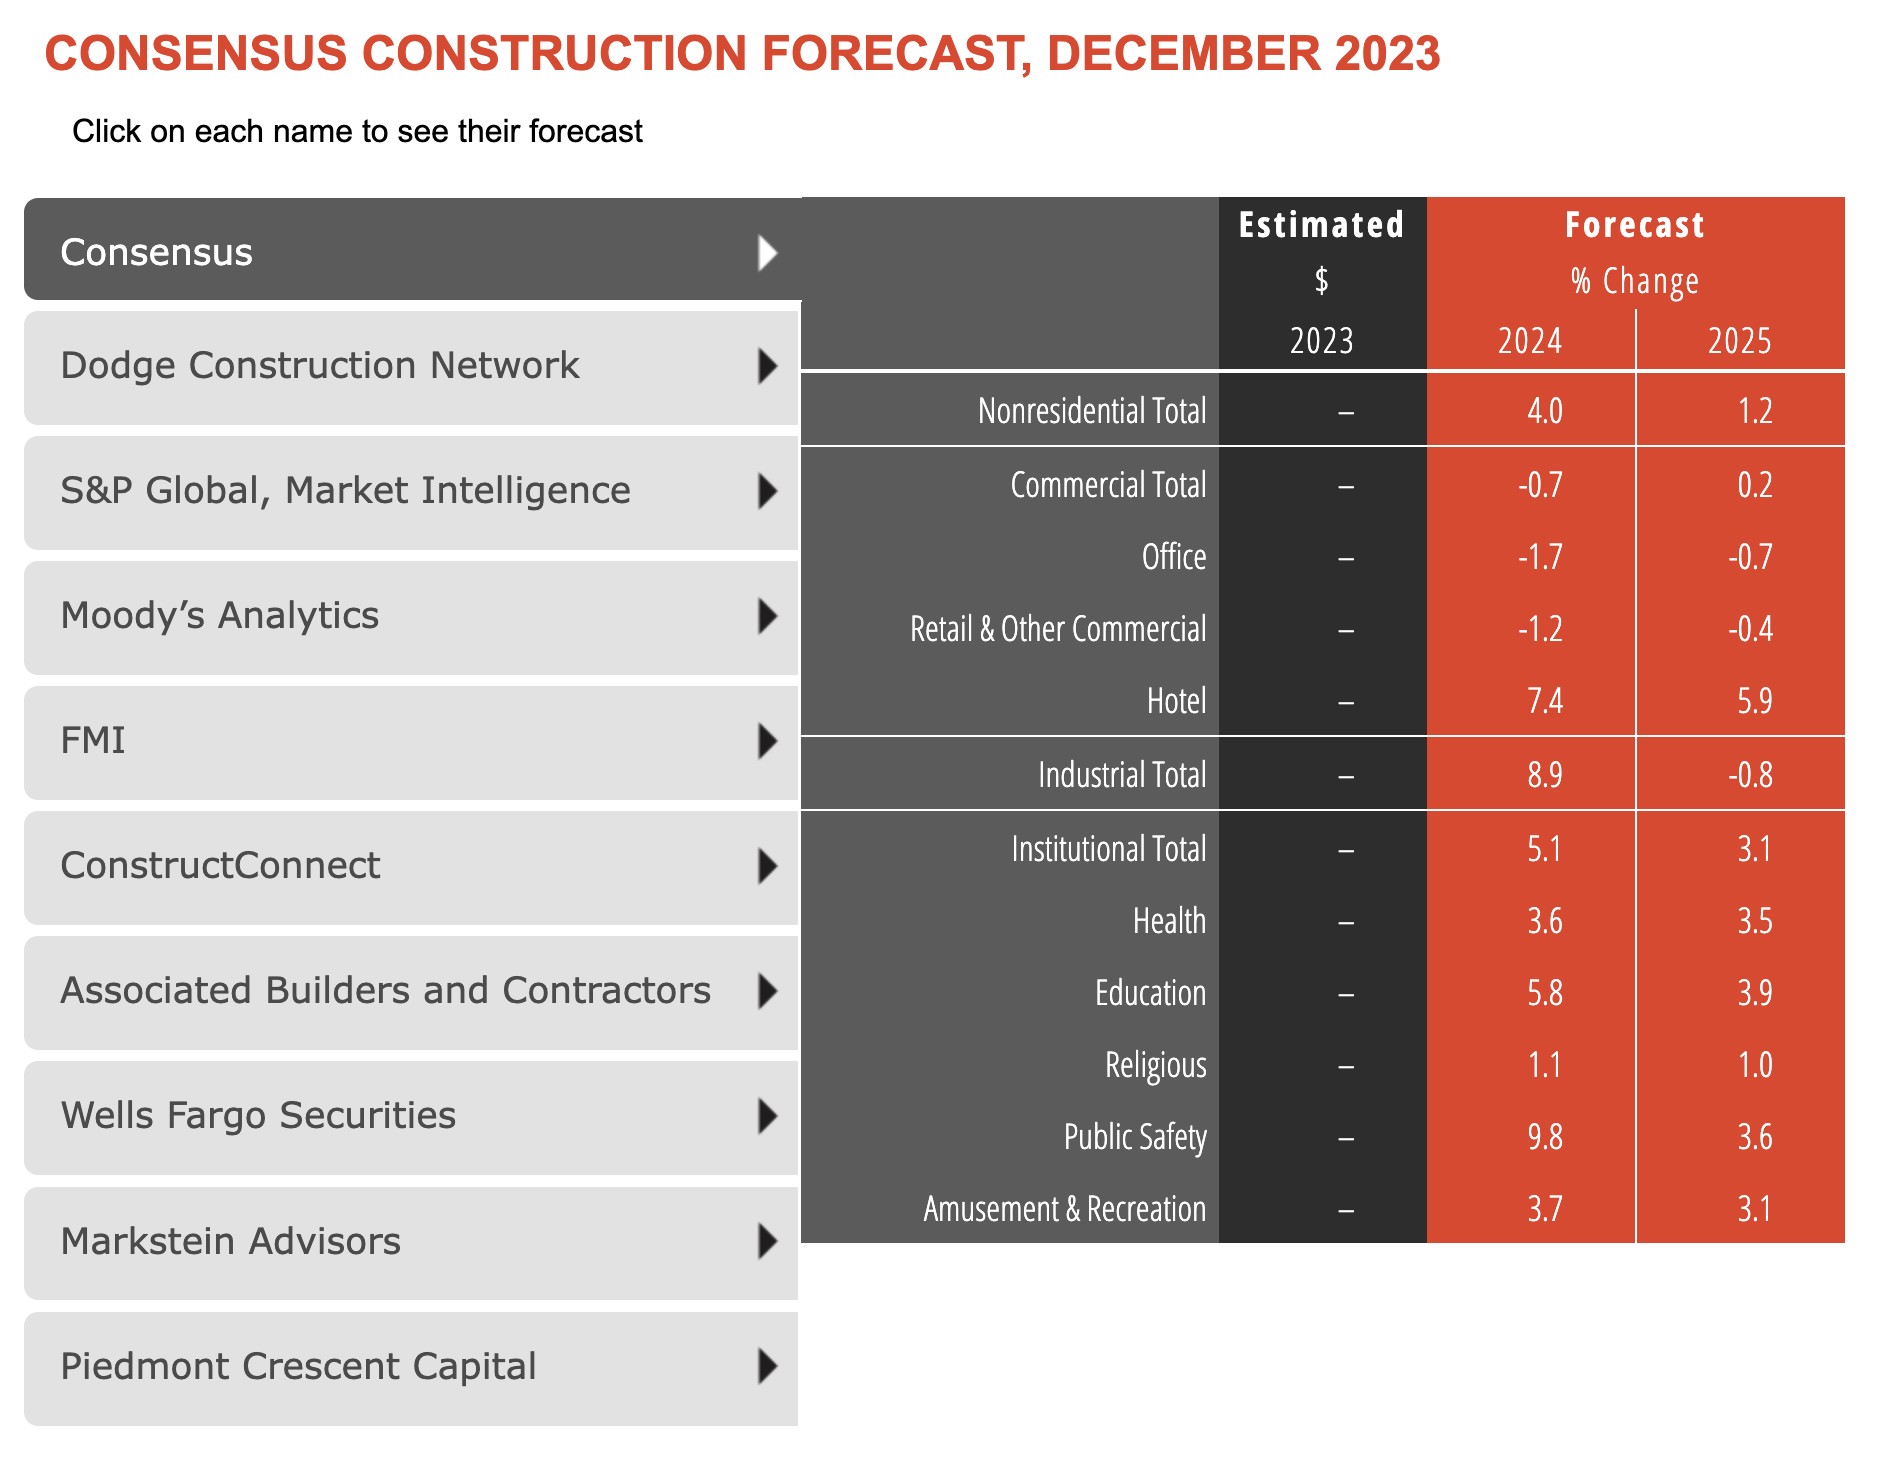 Leading economists forecast 4 growth in construction spending for